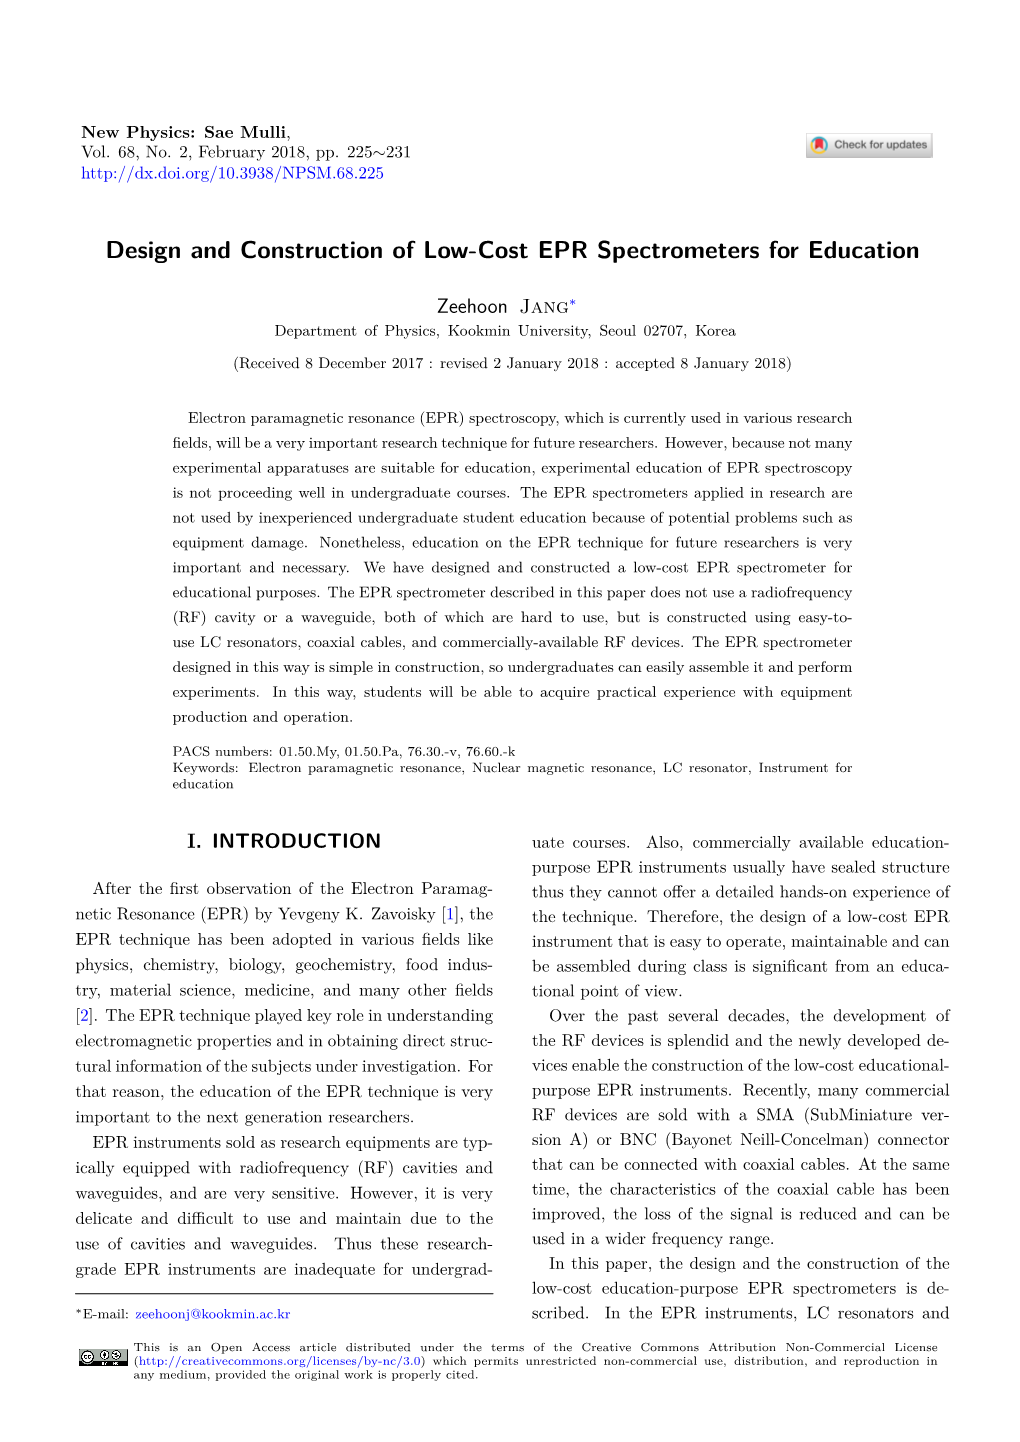 Design and Construction of Low-Cost EPR Spectrometers for Education